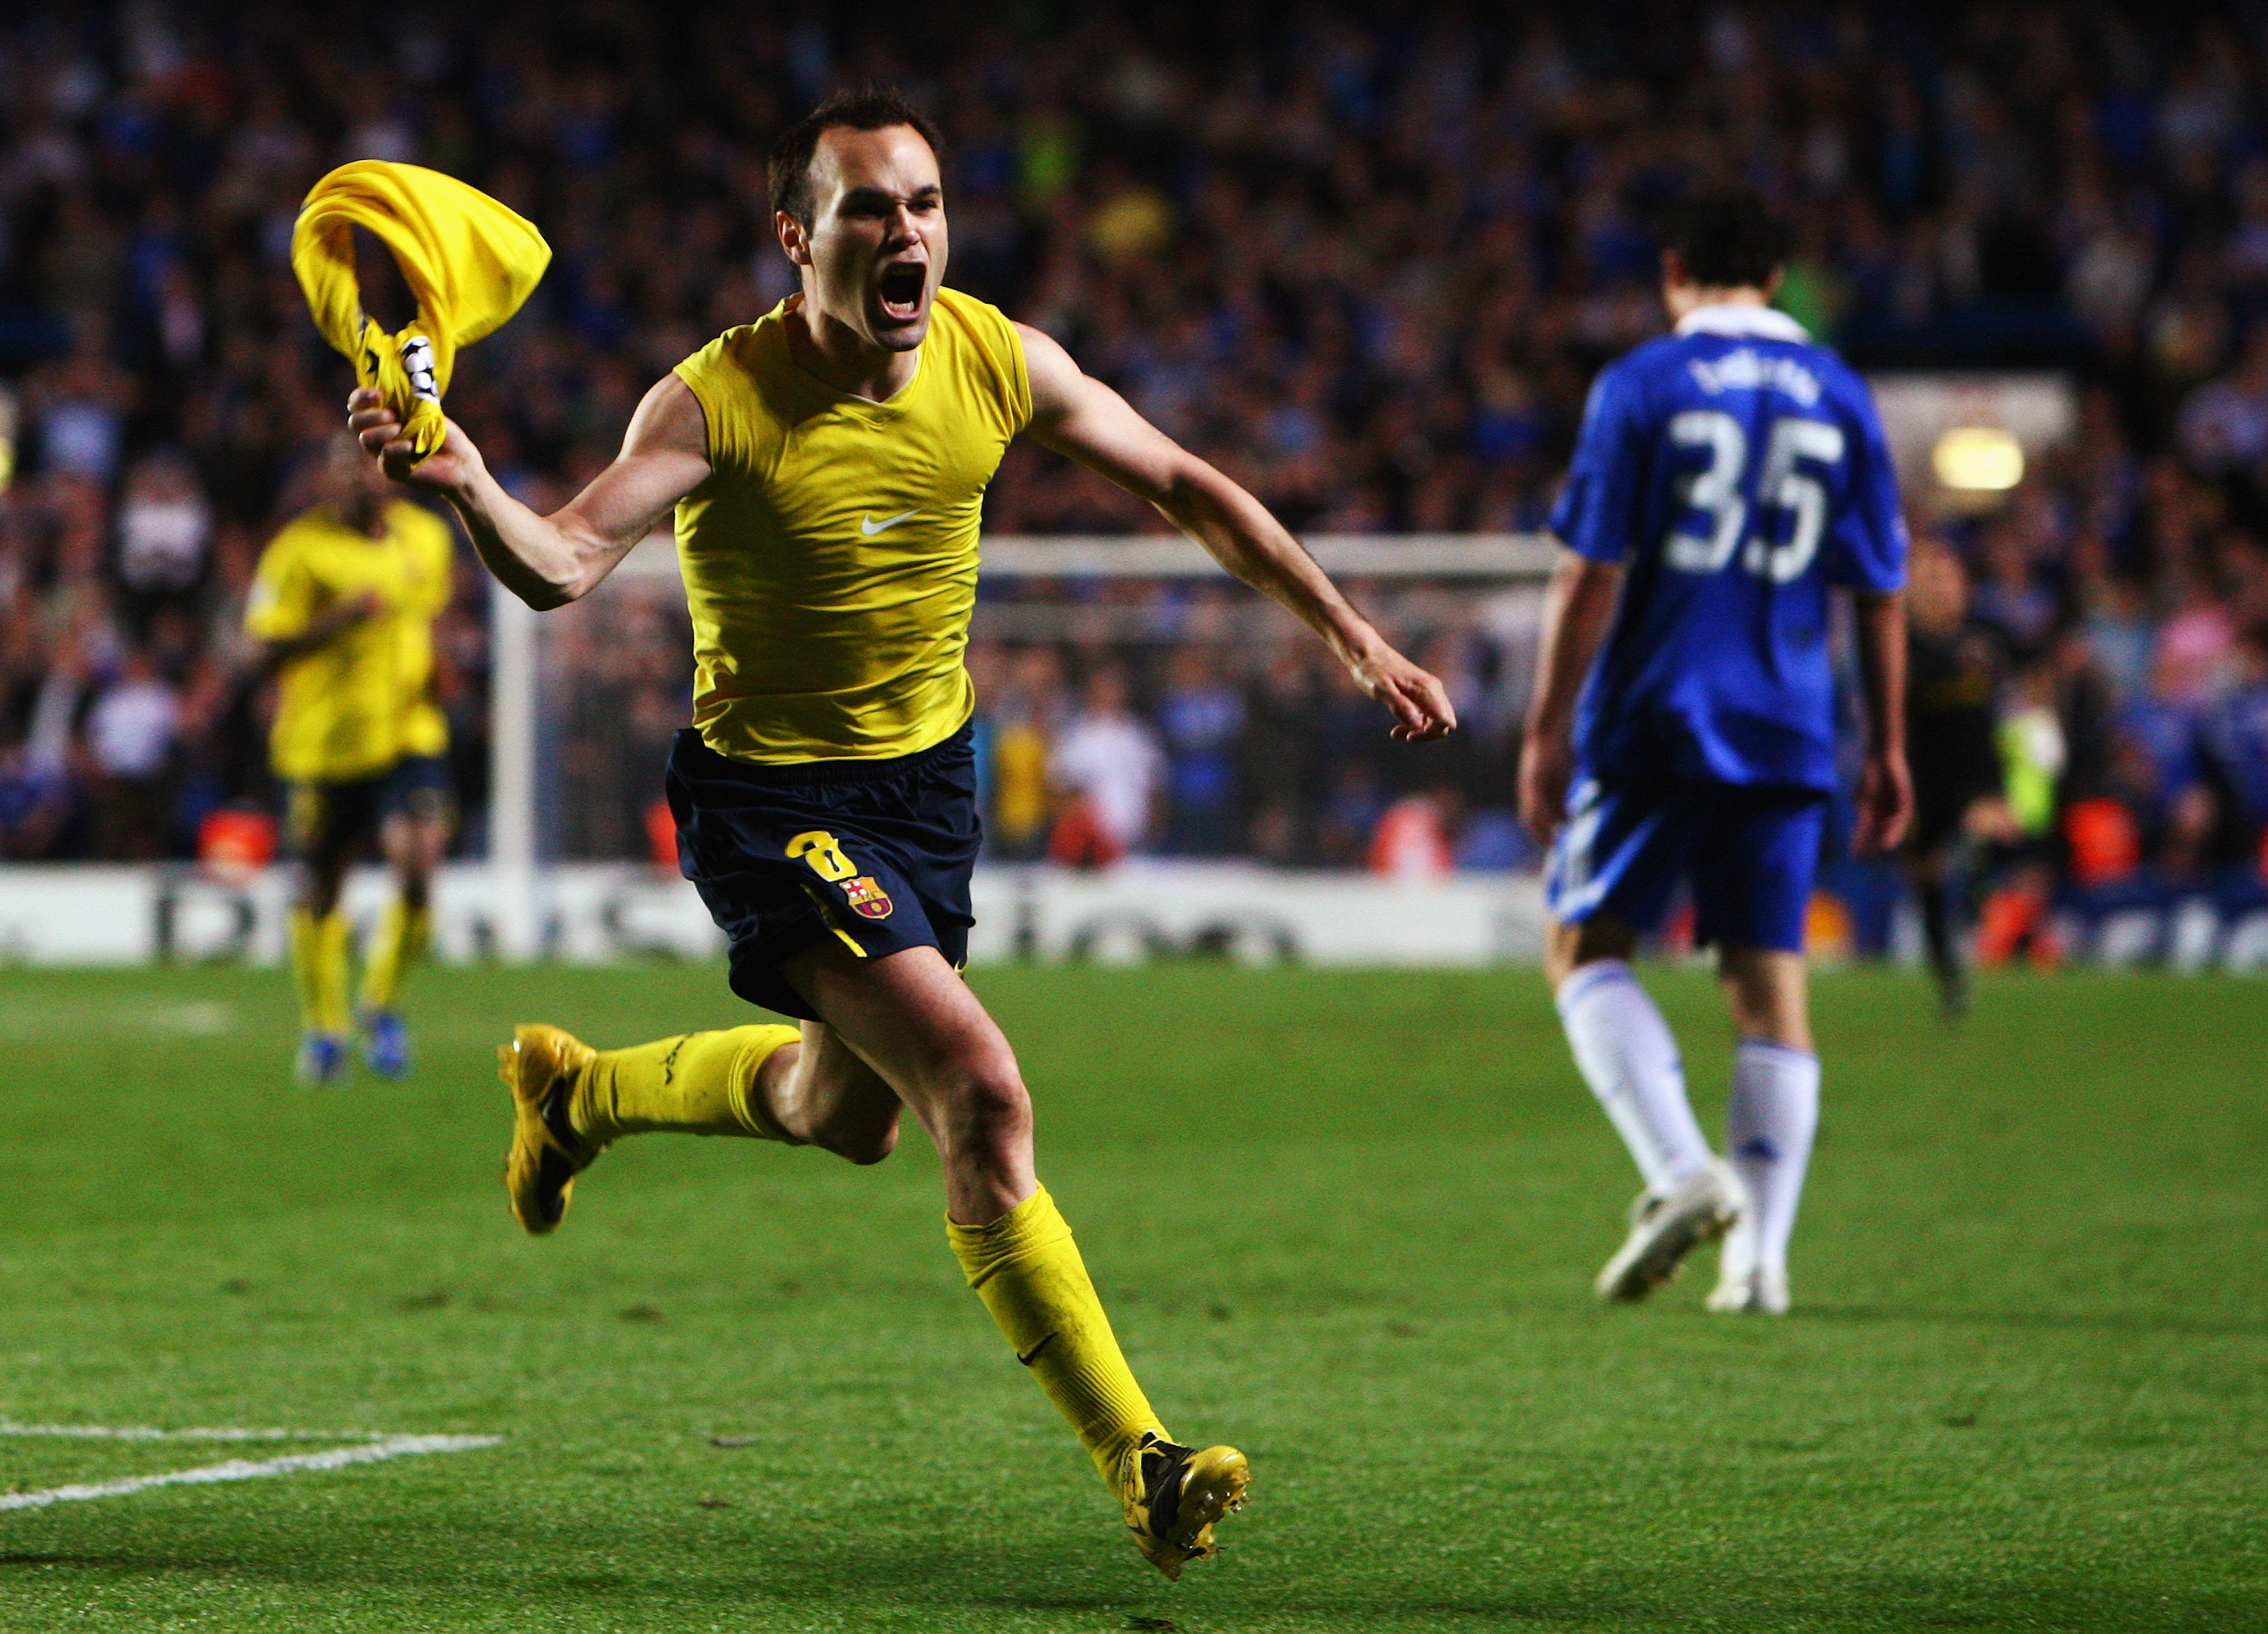 LONDON, ENGLAND - MAY 06:  Andres Iniesta of Barcelona celebrates scoring in the final minutes during the UEFA Champions League Semi Final Second Leg match between Chelsea and Barcelona at Stamford Bridge on May 6, 2009 in London, England.  (Photo by Jami